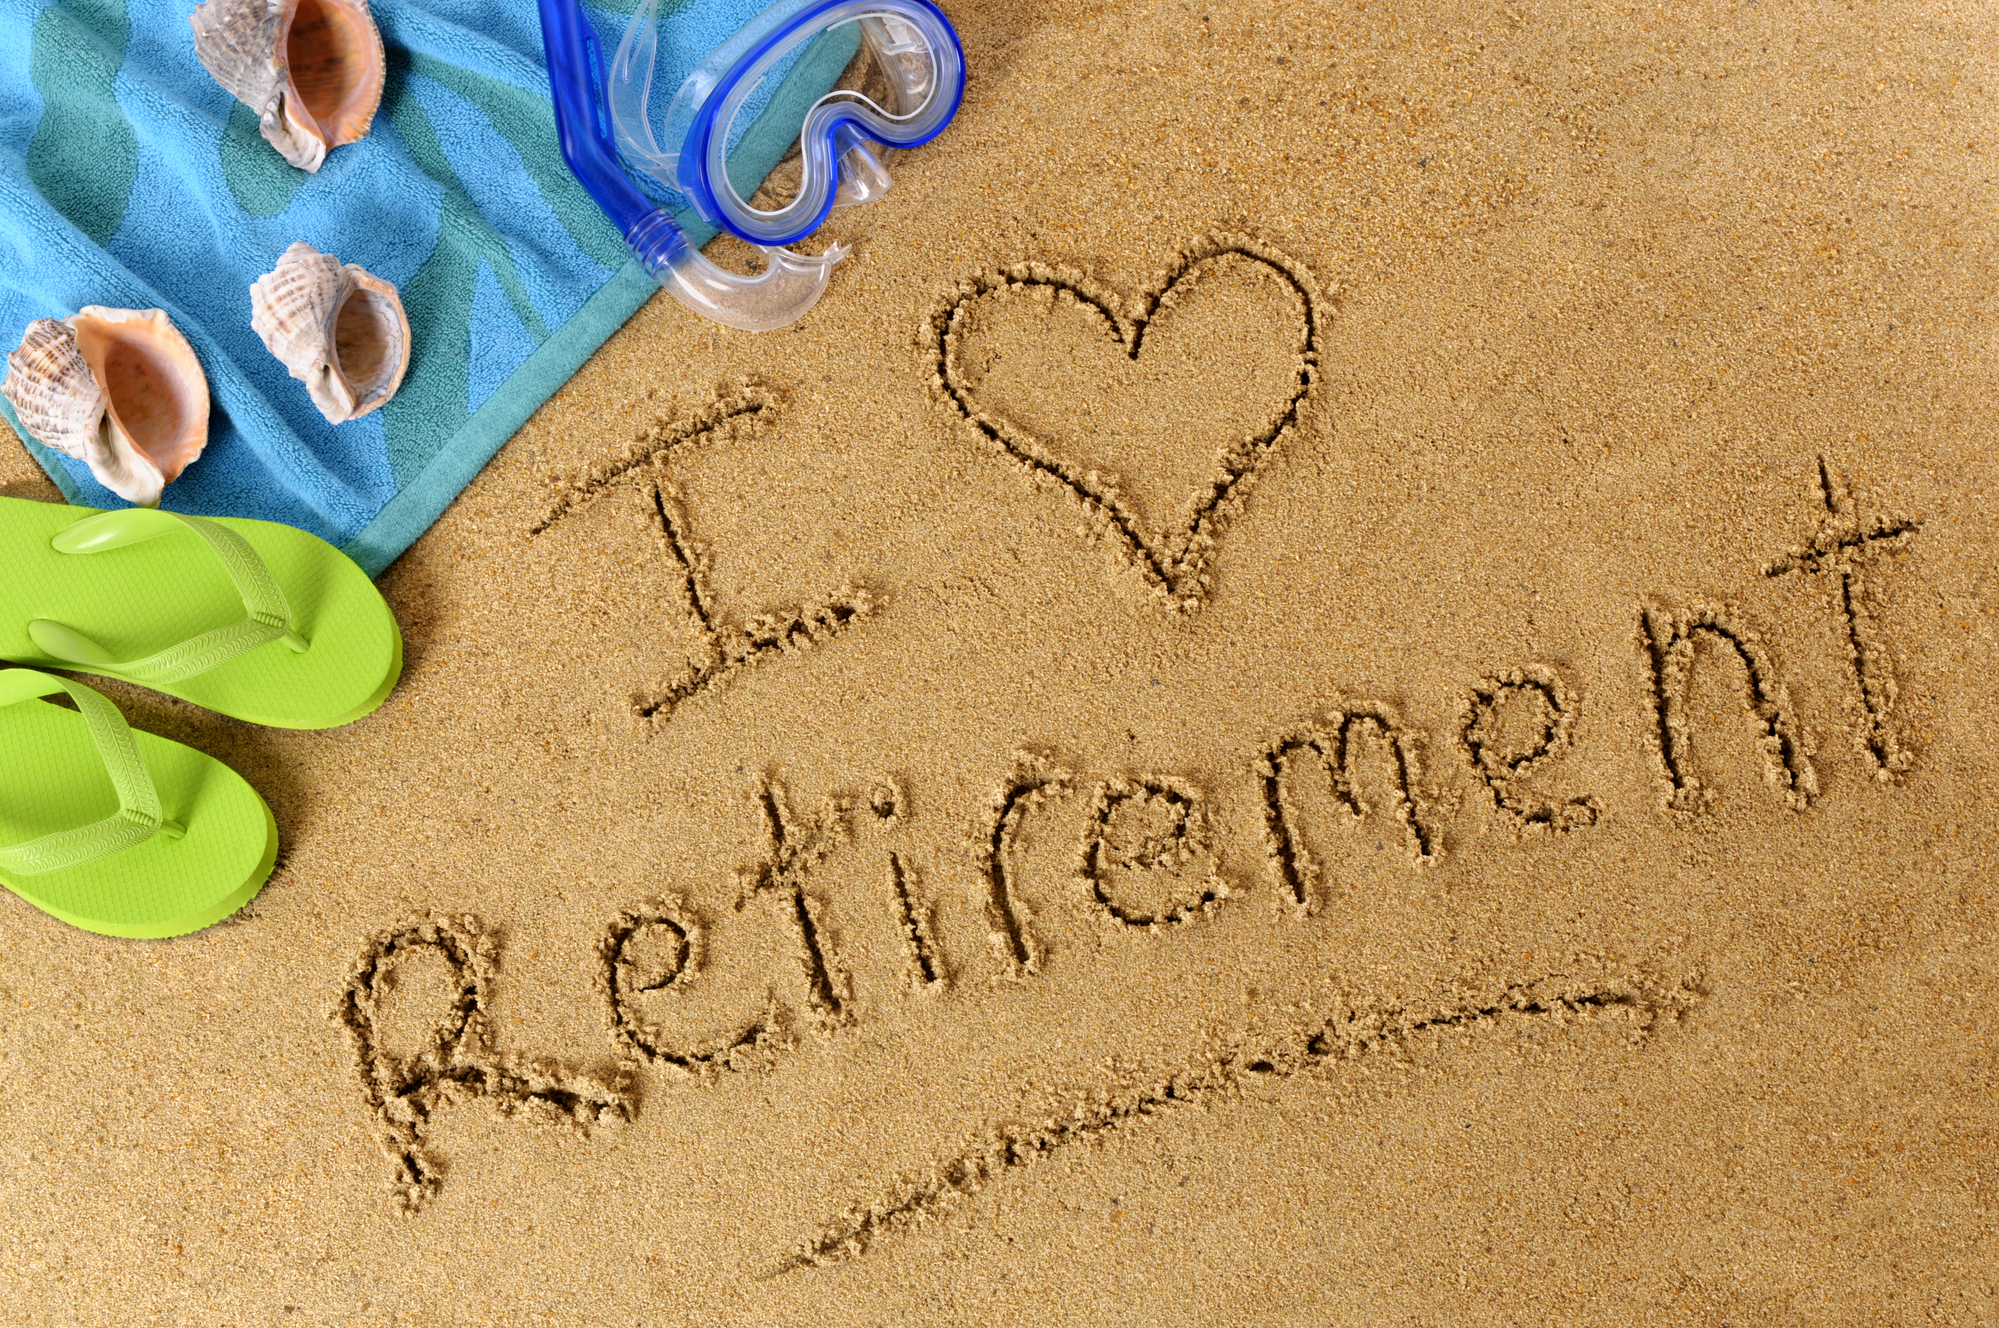 A photo of beach equipment sitting on wet sand with the words "I Heart Retirement" written in it